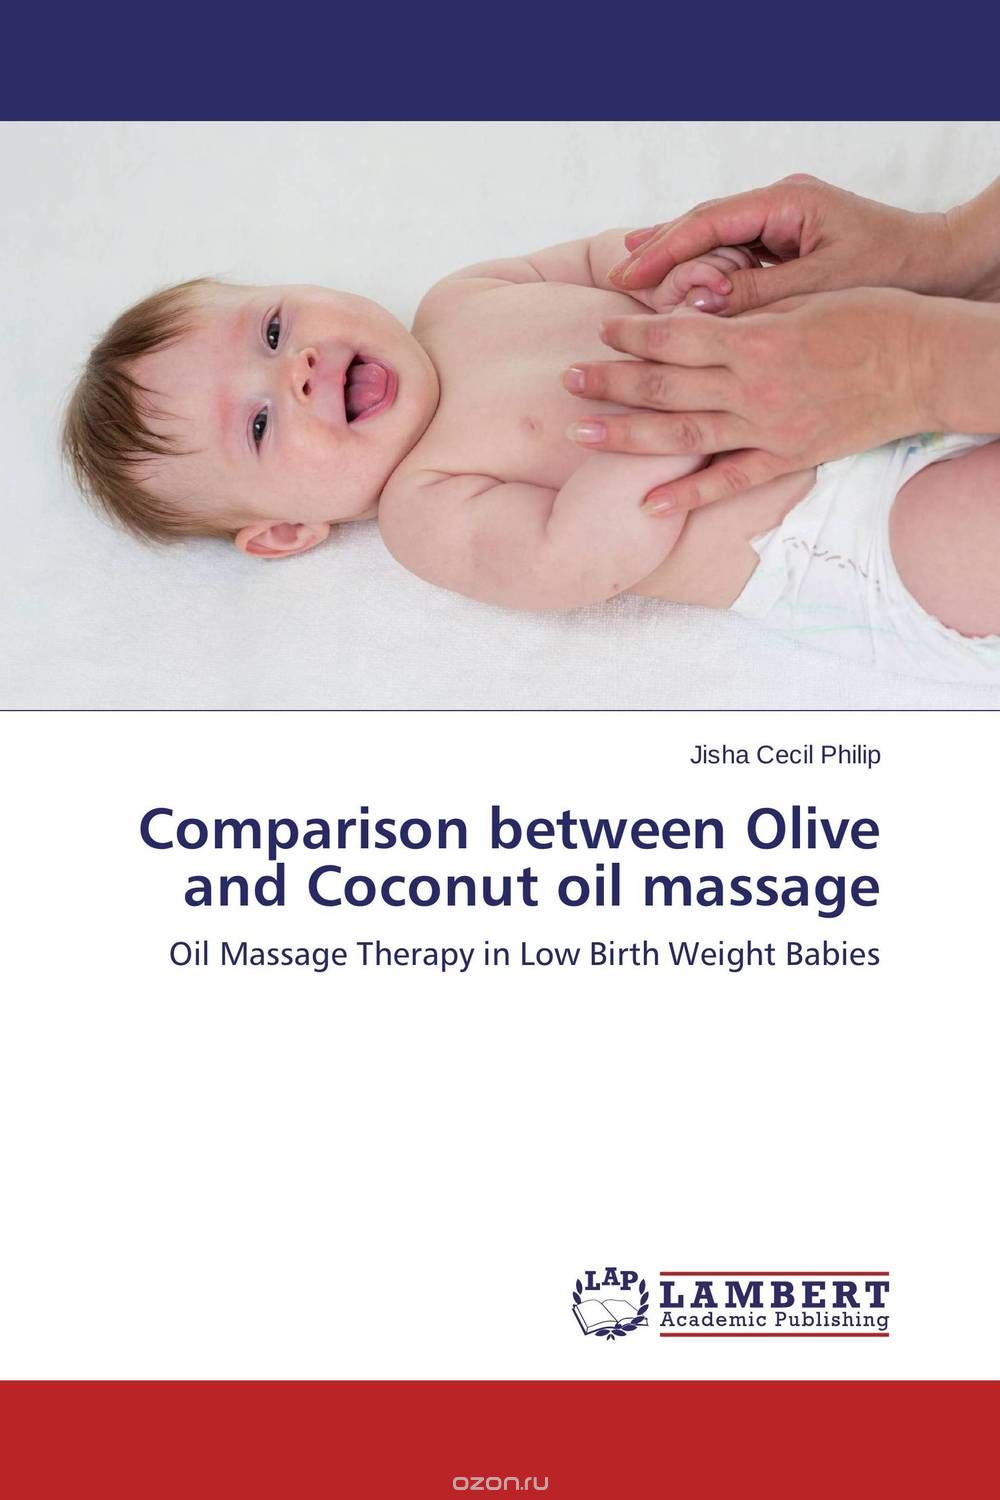 Comparison between Olive and Coconut oil massage